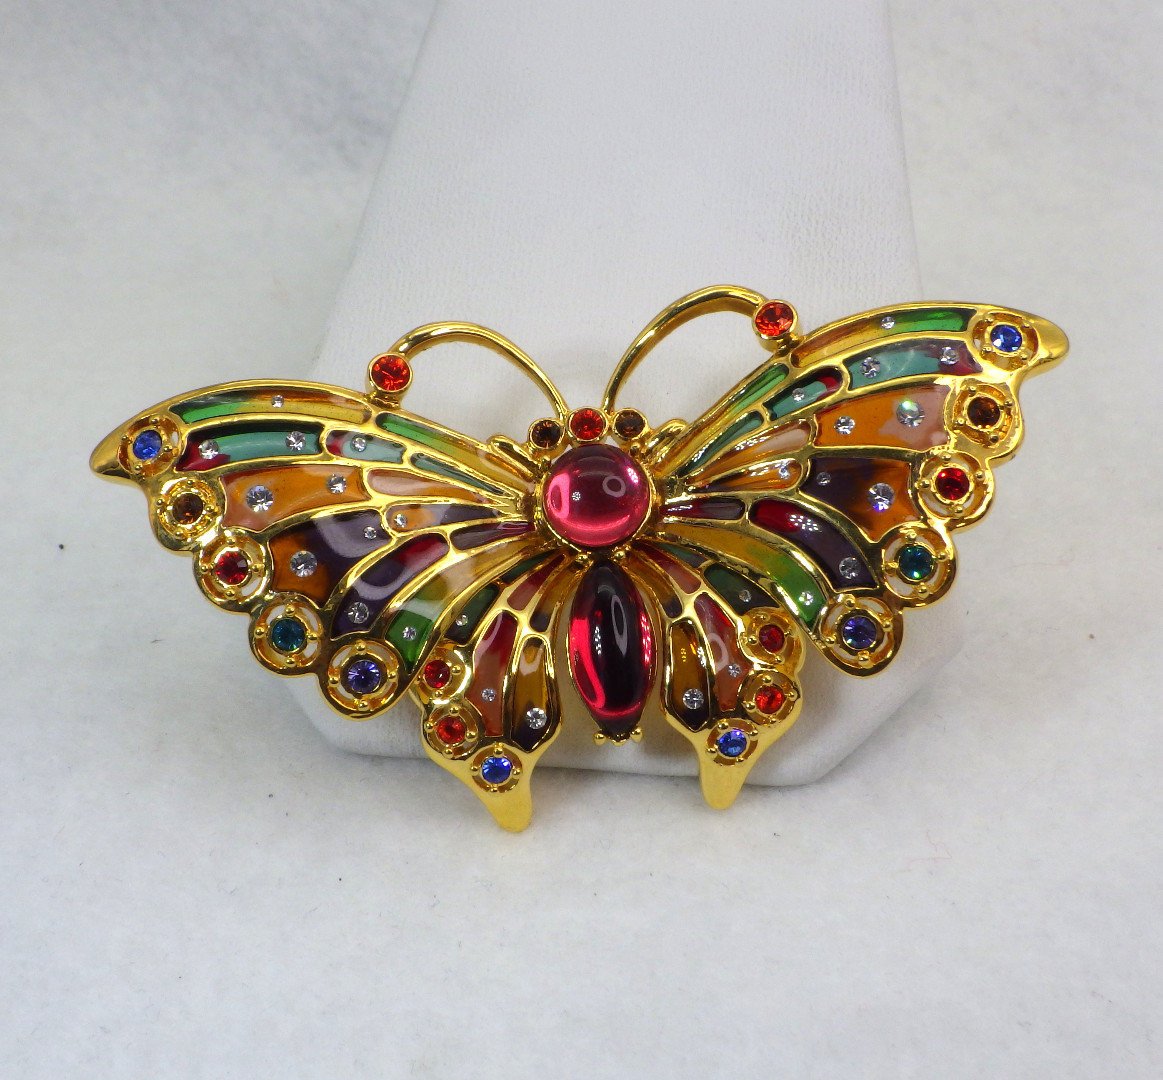 Excited to share the latest addition to my #etsyshop: #PliqueA'Jour Style #ButterflyBrooch #DesignerSigned #JoanRivers #Vintage 1990s Retro Jewelry Excellent Condition Collectible Jewelry Gift etsy.me/2XVJ0AR #jewelry #brooch #gold #VintageLoveByDiana